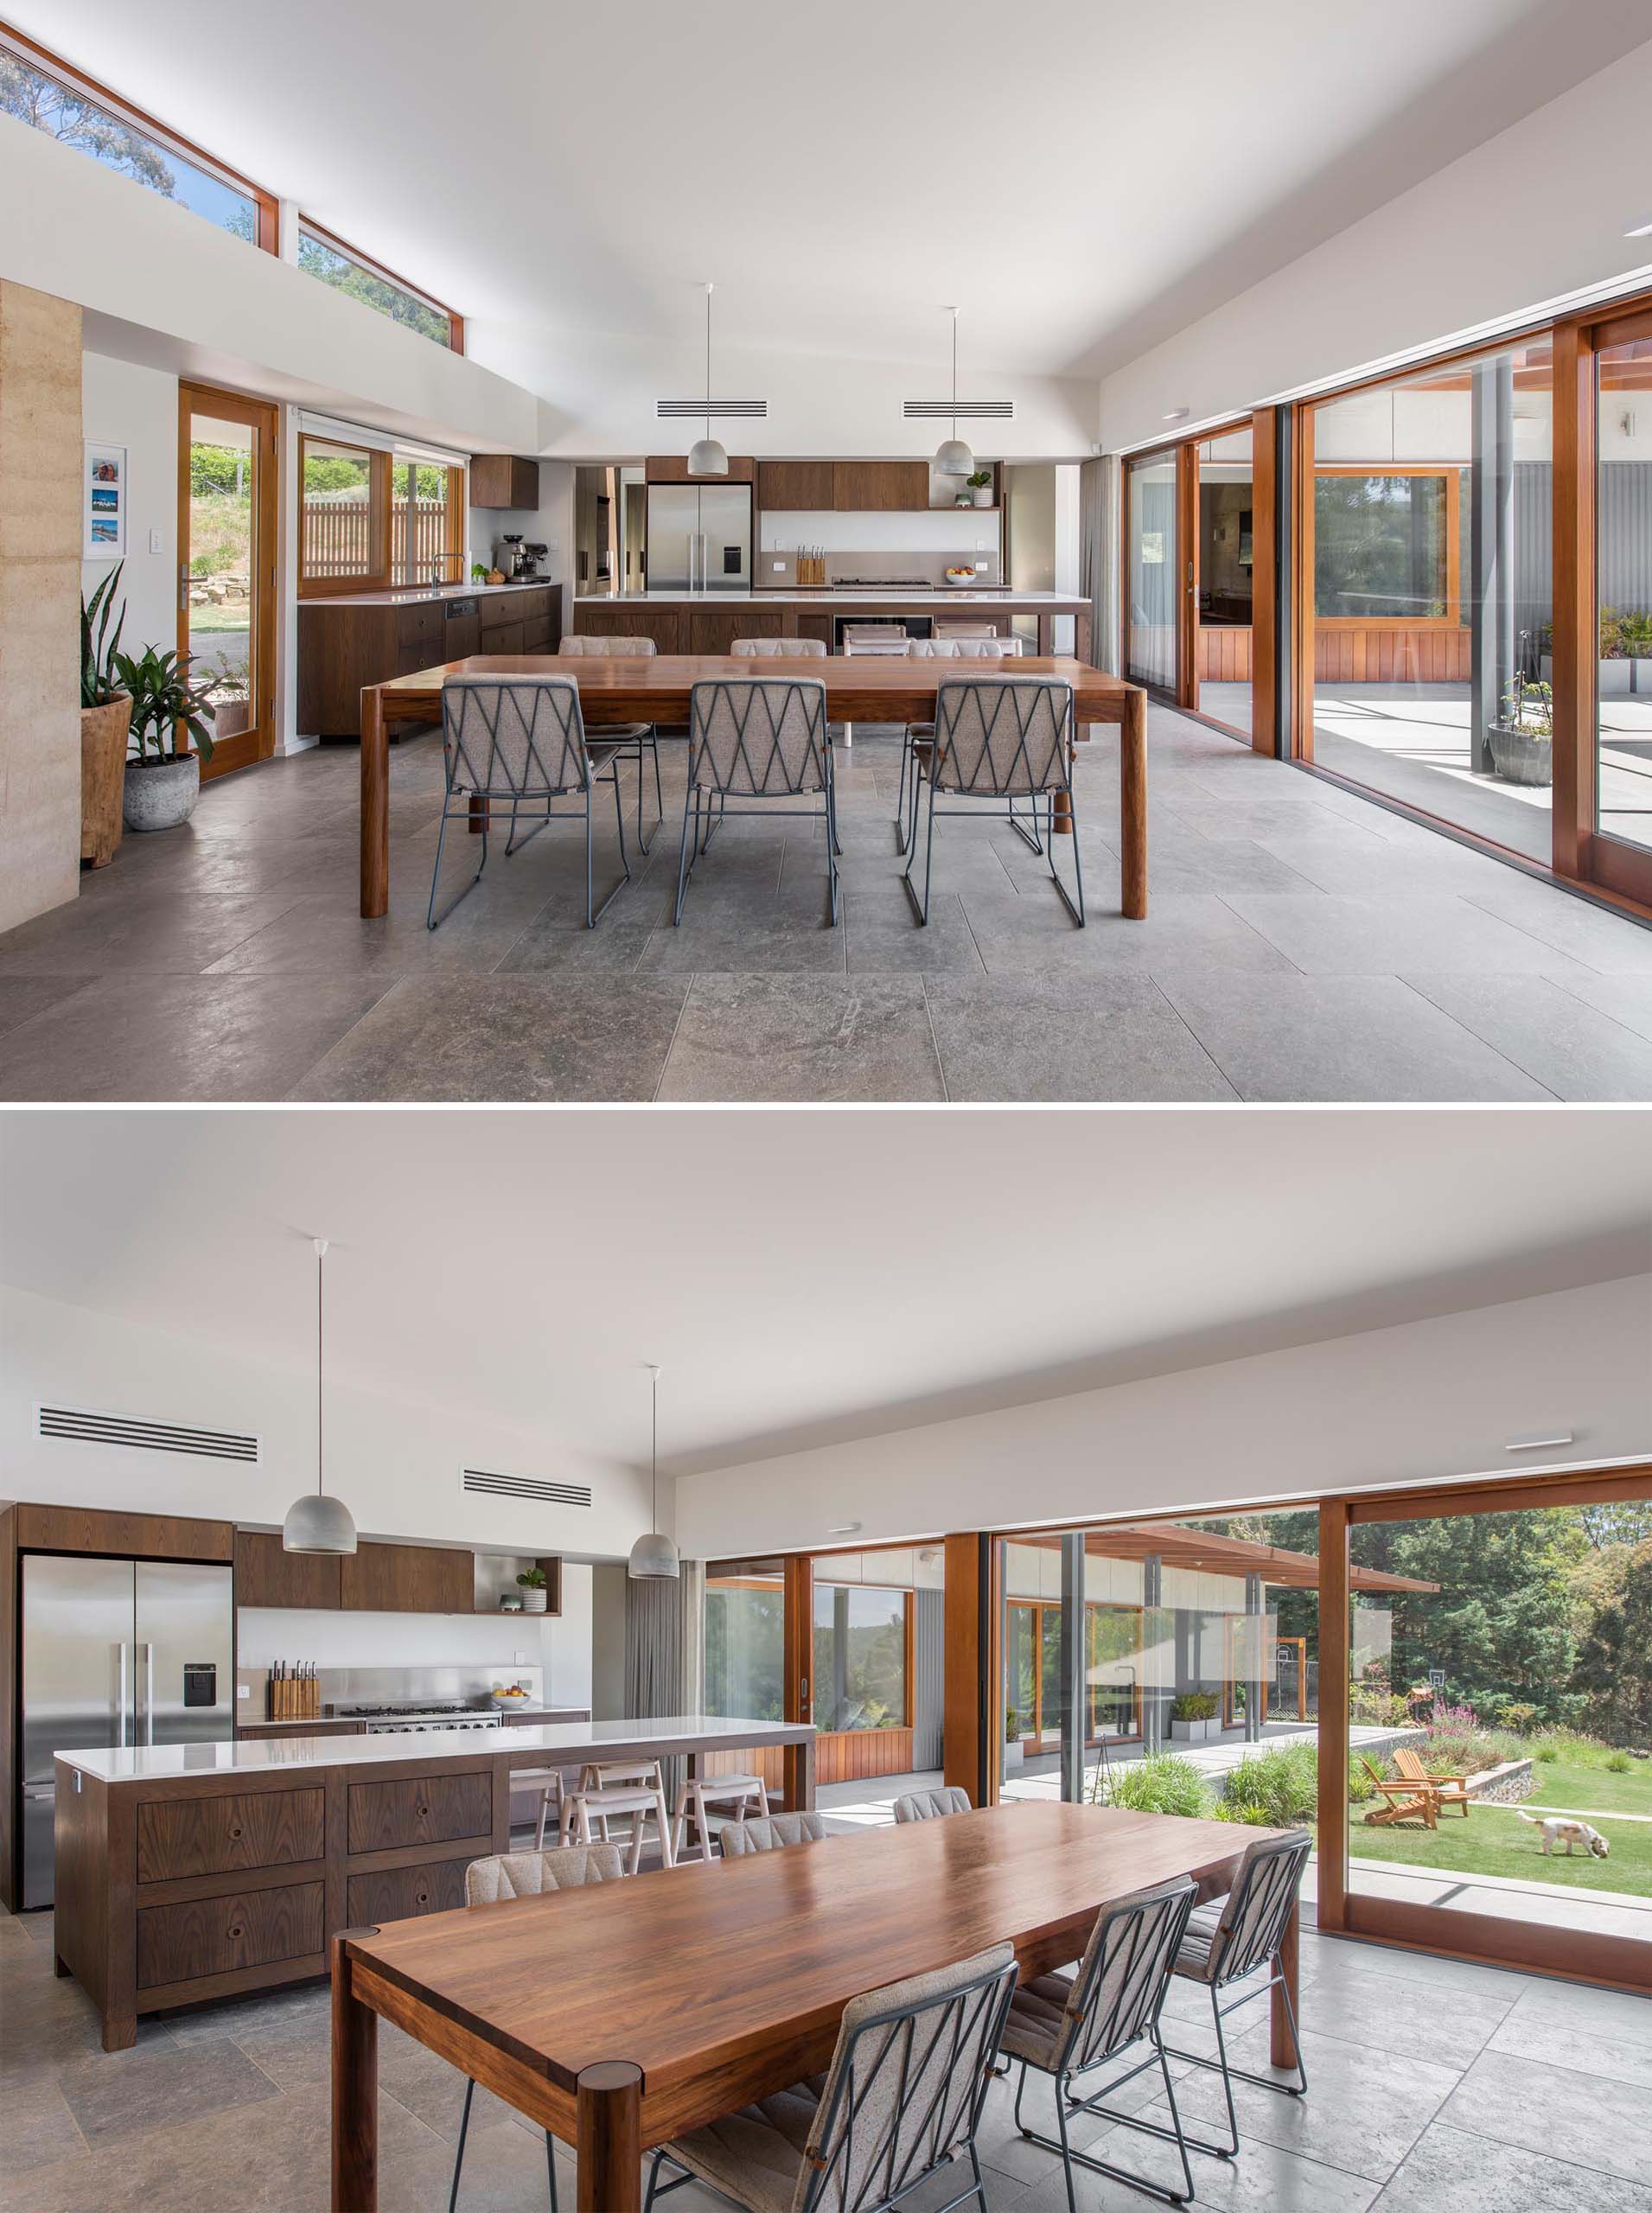 A modern interior with an open plan kitchen, dining and living area, which has an immediate relationship with the outdoor entertaining space, and can be accessed through the wood framed sliding glass doors.